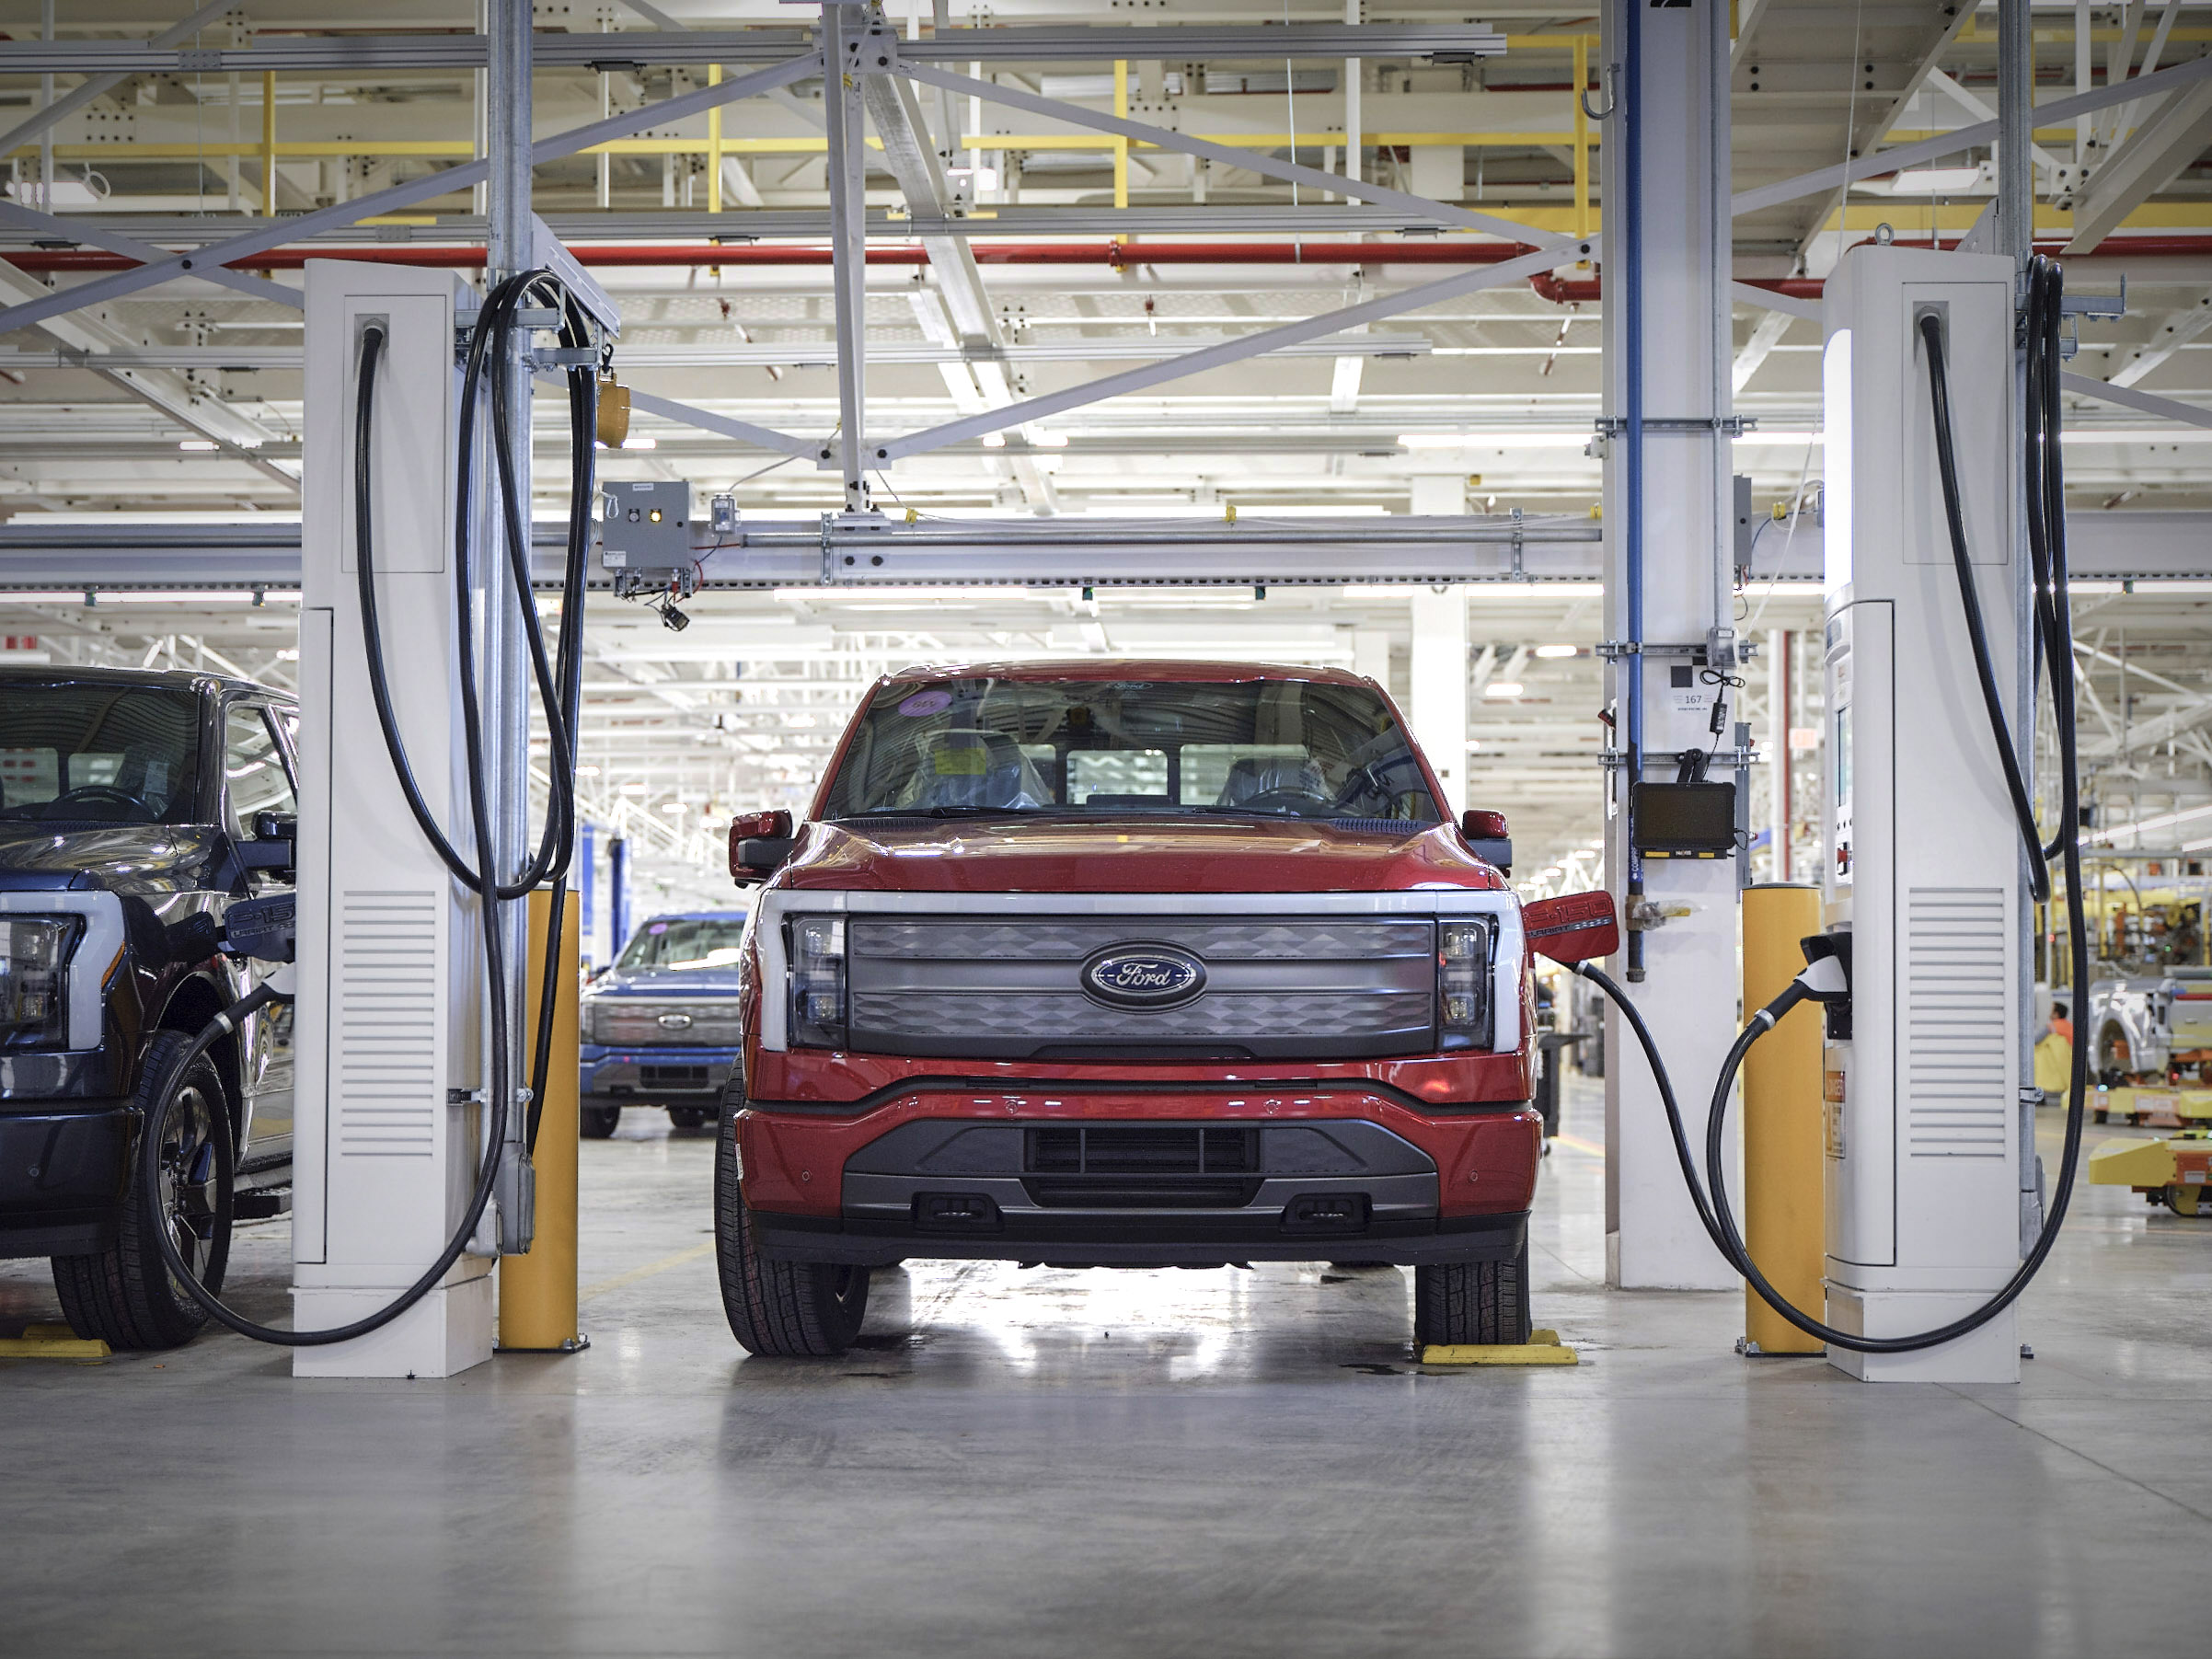 Planet Forward at Ford: Building the 'Just Transition'